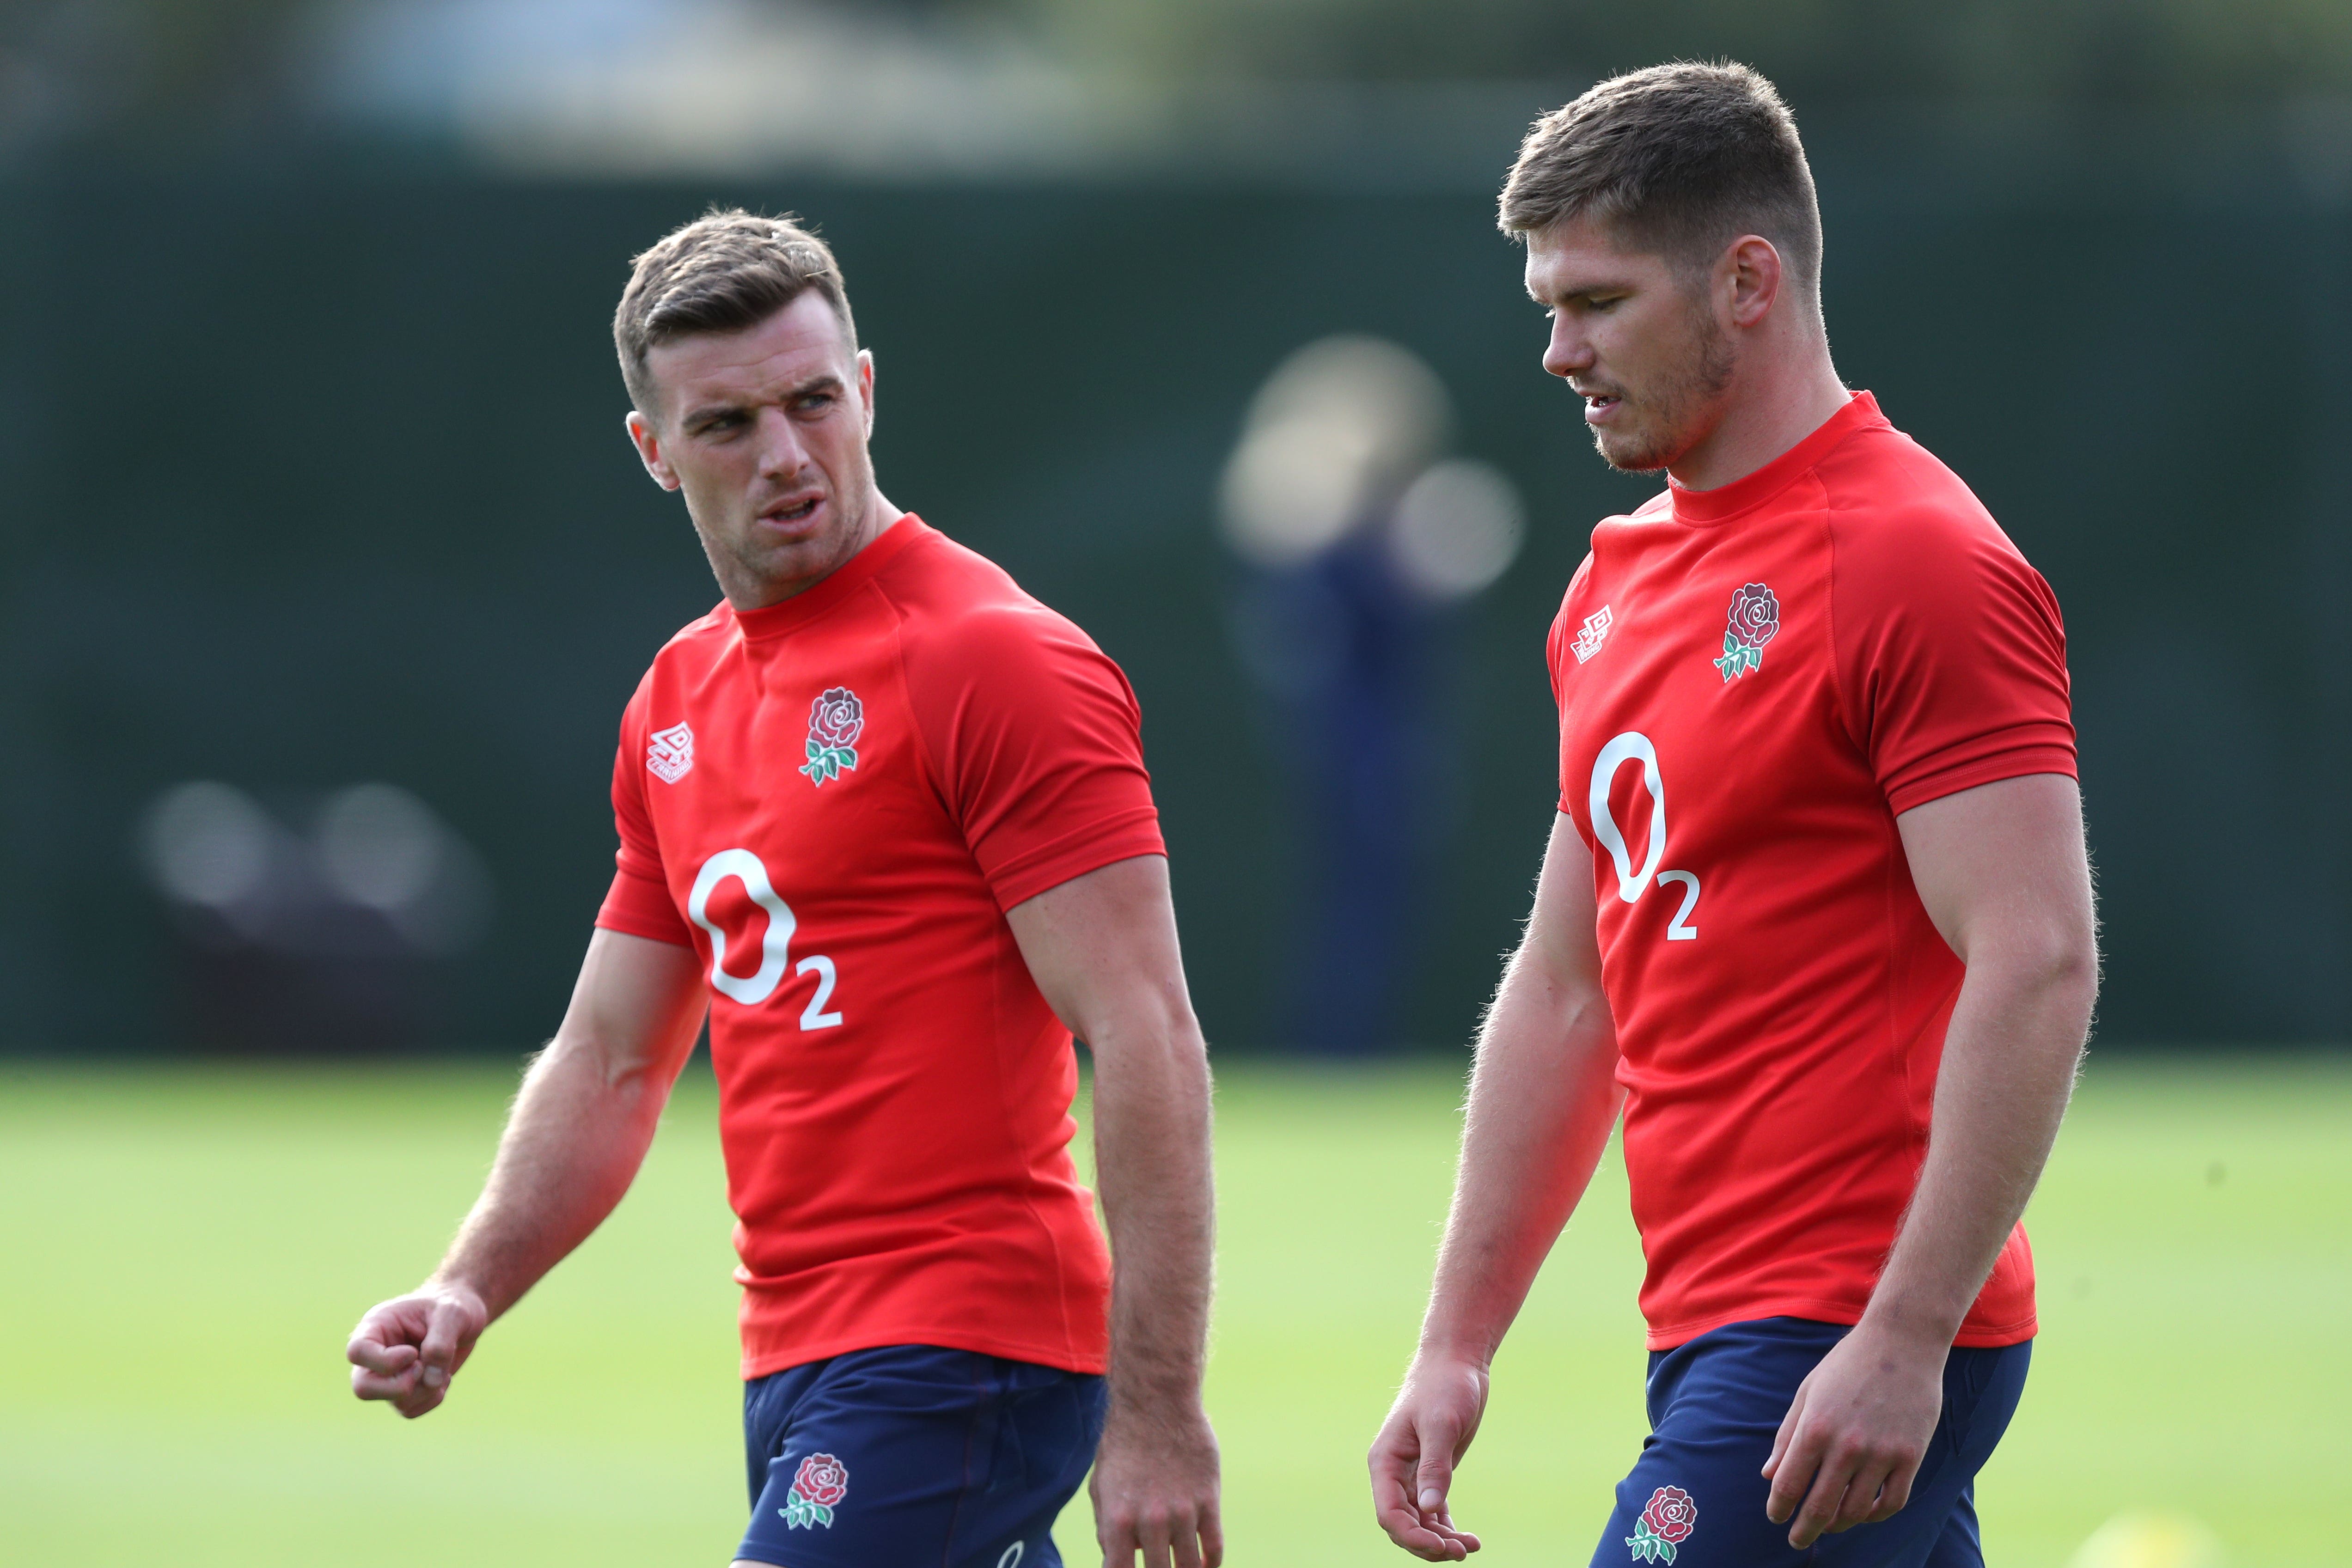 George Ford (left) and Owen Farrell could unite for England again at the World Cup